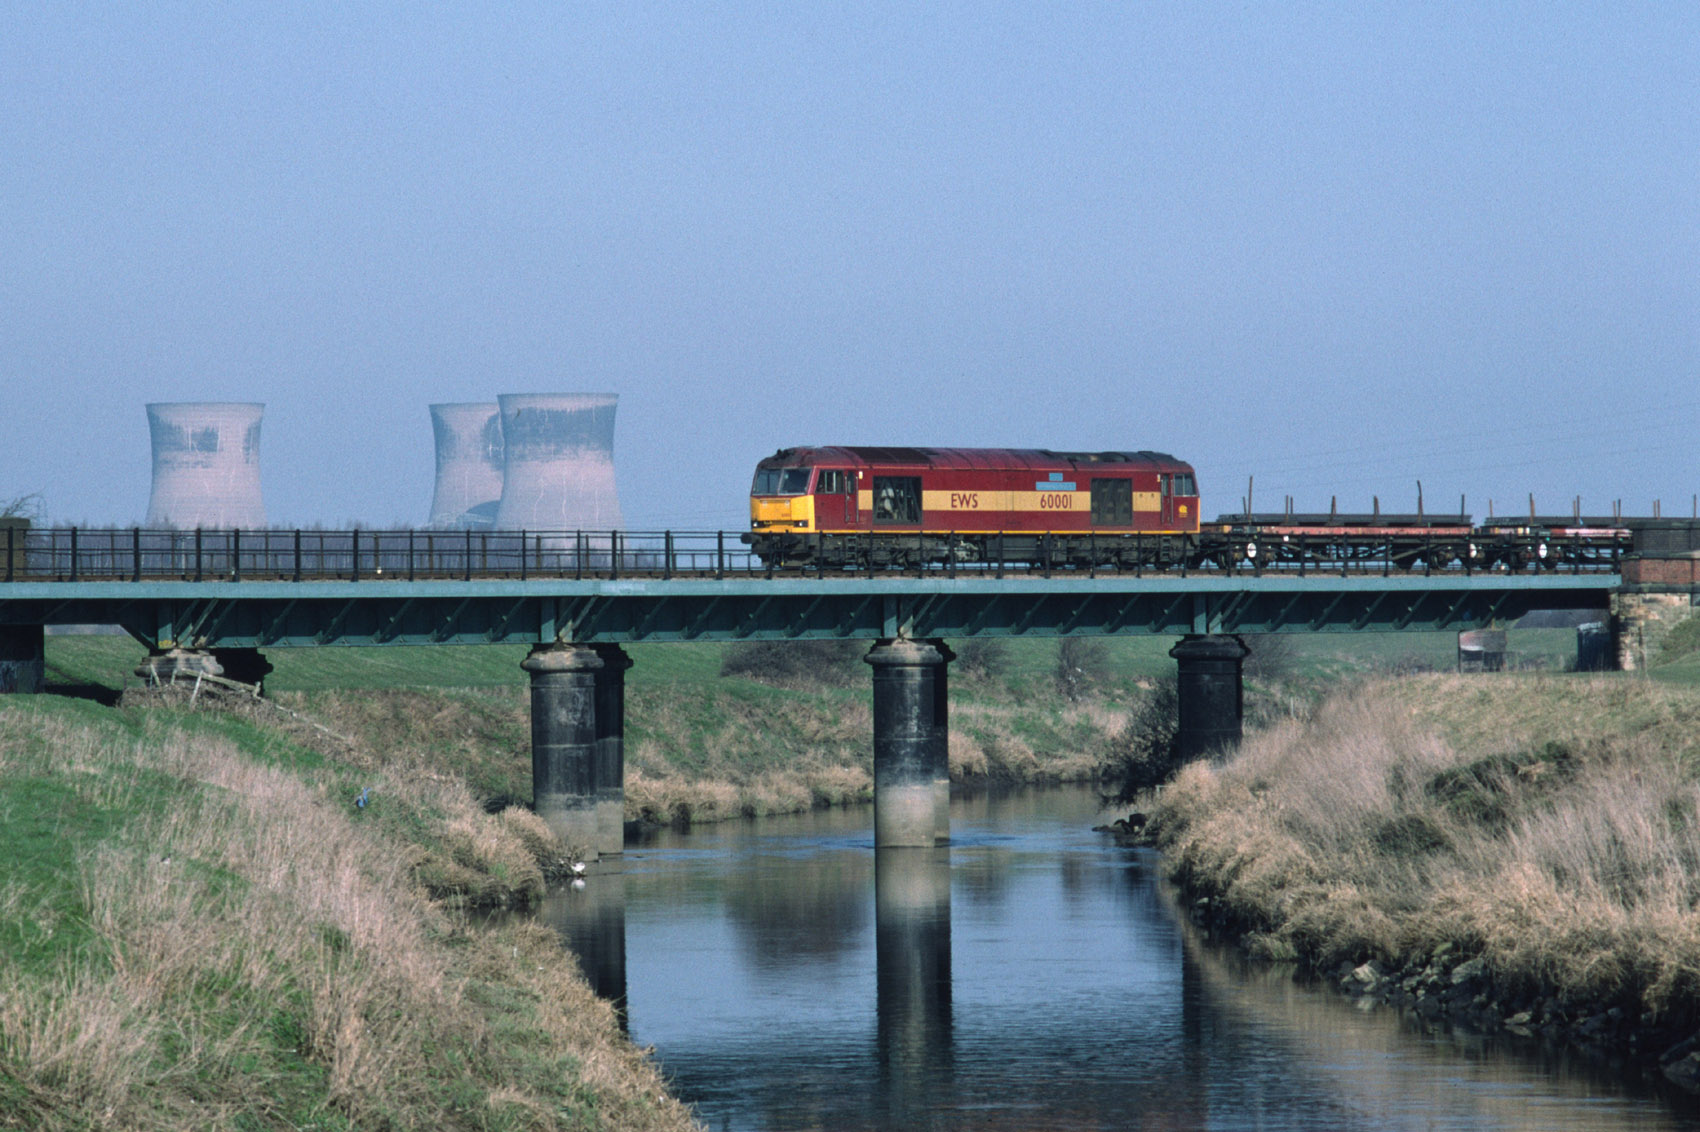 60001 (The Railway Observer) heading west over the River Don at Long Sandall (nr Kirk Sandall station) with a loaded steel train (6J48) from Scunthorpe to Aldwarke on 02/03/04. The cooling towers of the disused Thorpe Marsh power station are in the background.